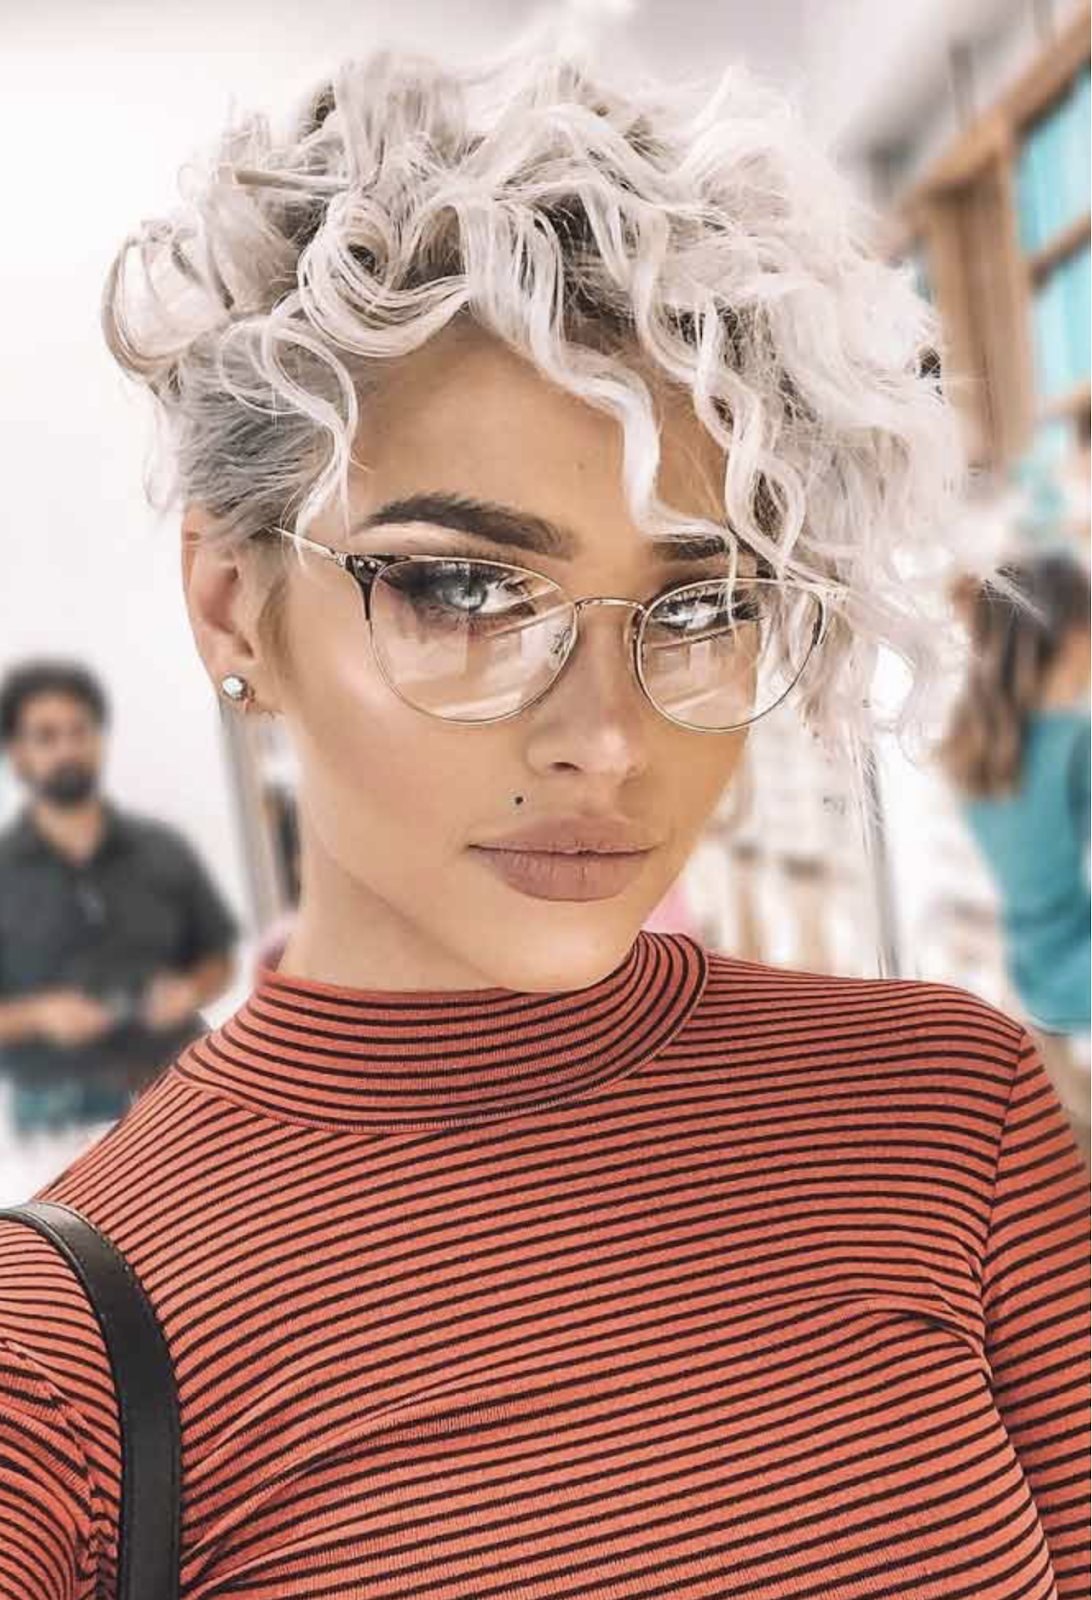 Latest Modern Short Shaggy Hairstyles and Haircuts 2019